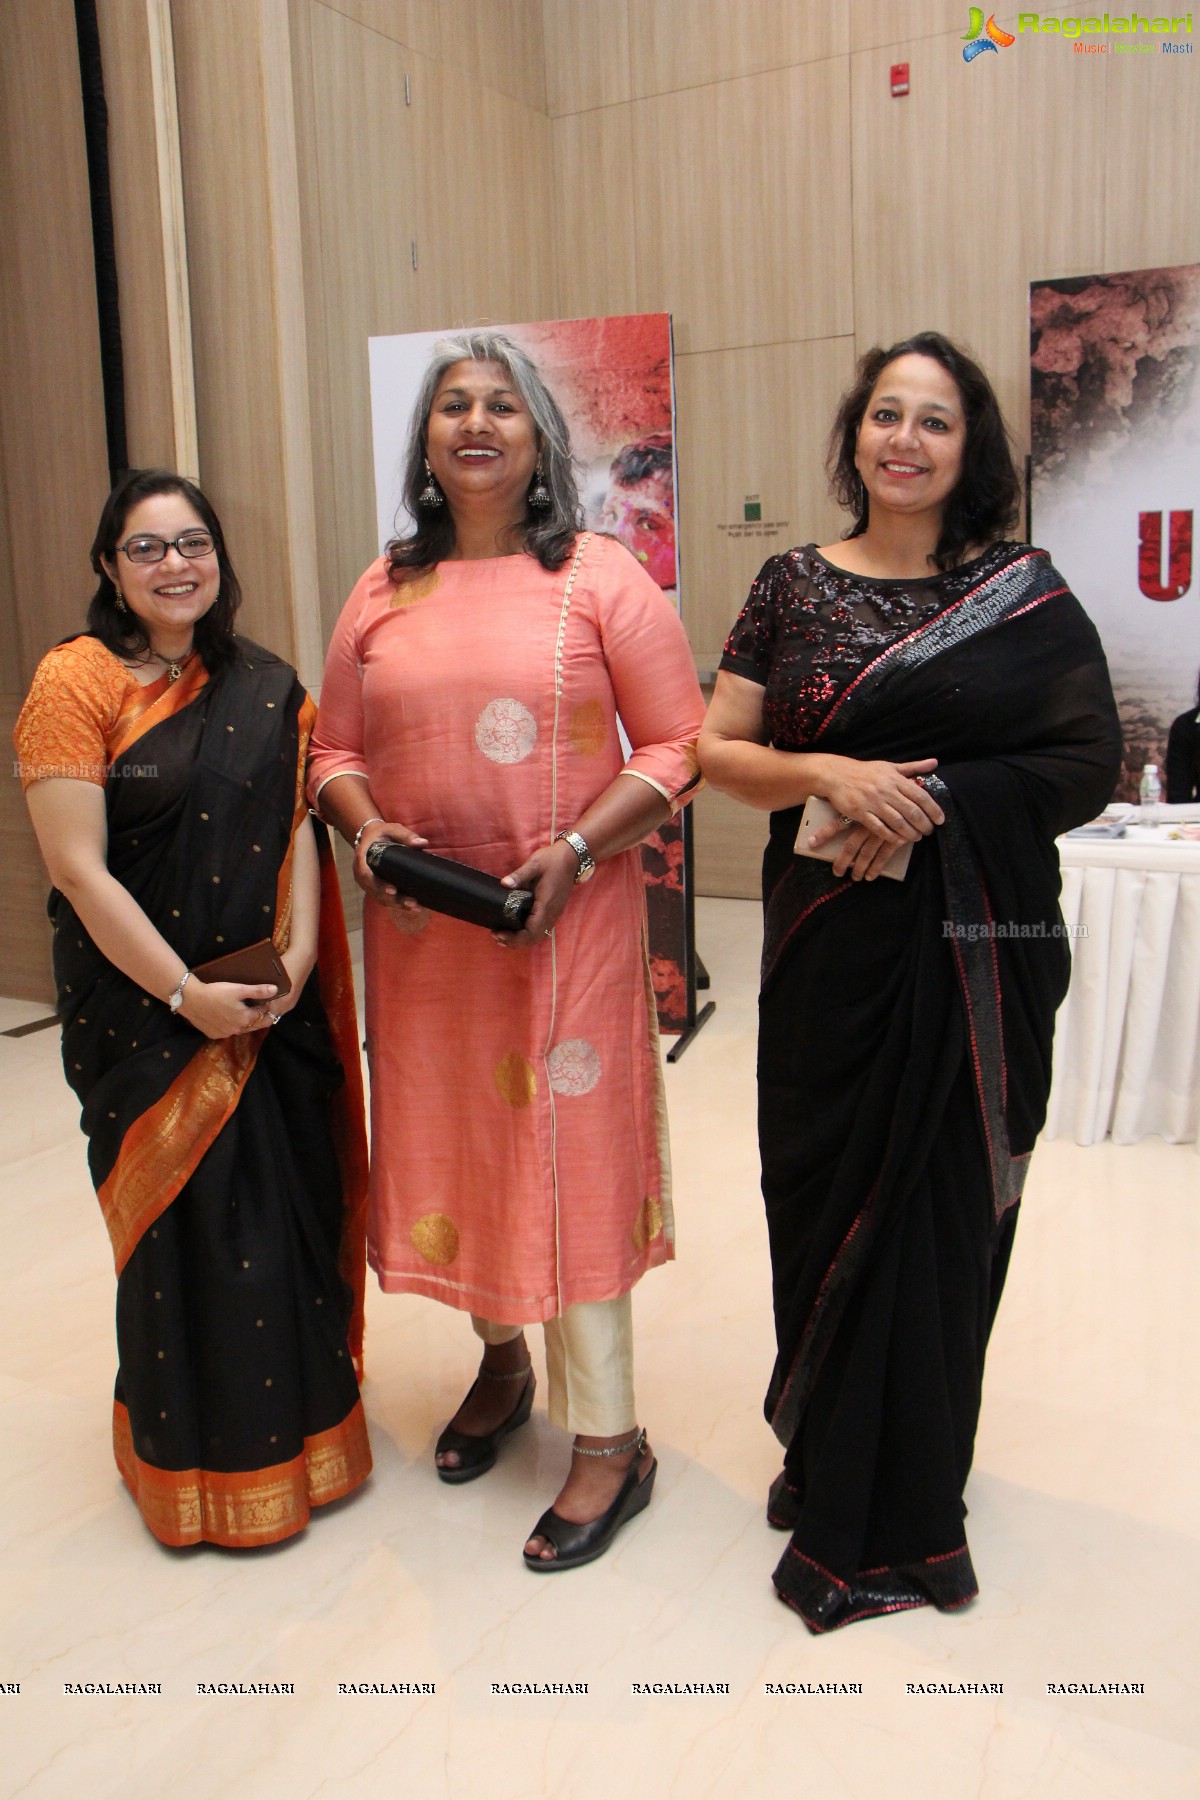 The Unwanted - Special Screening of a Documentary on Leprosy in Hyderabad